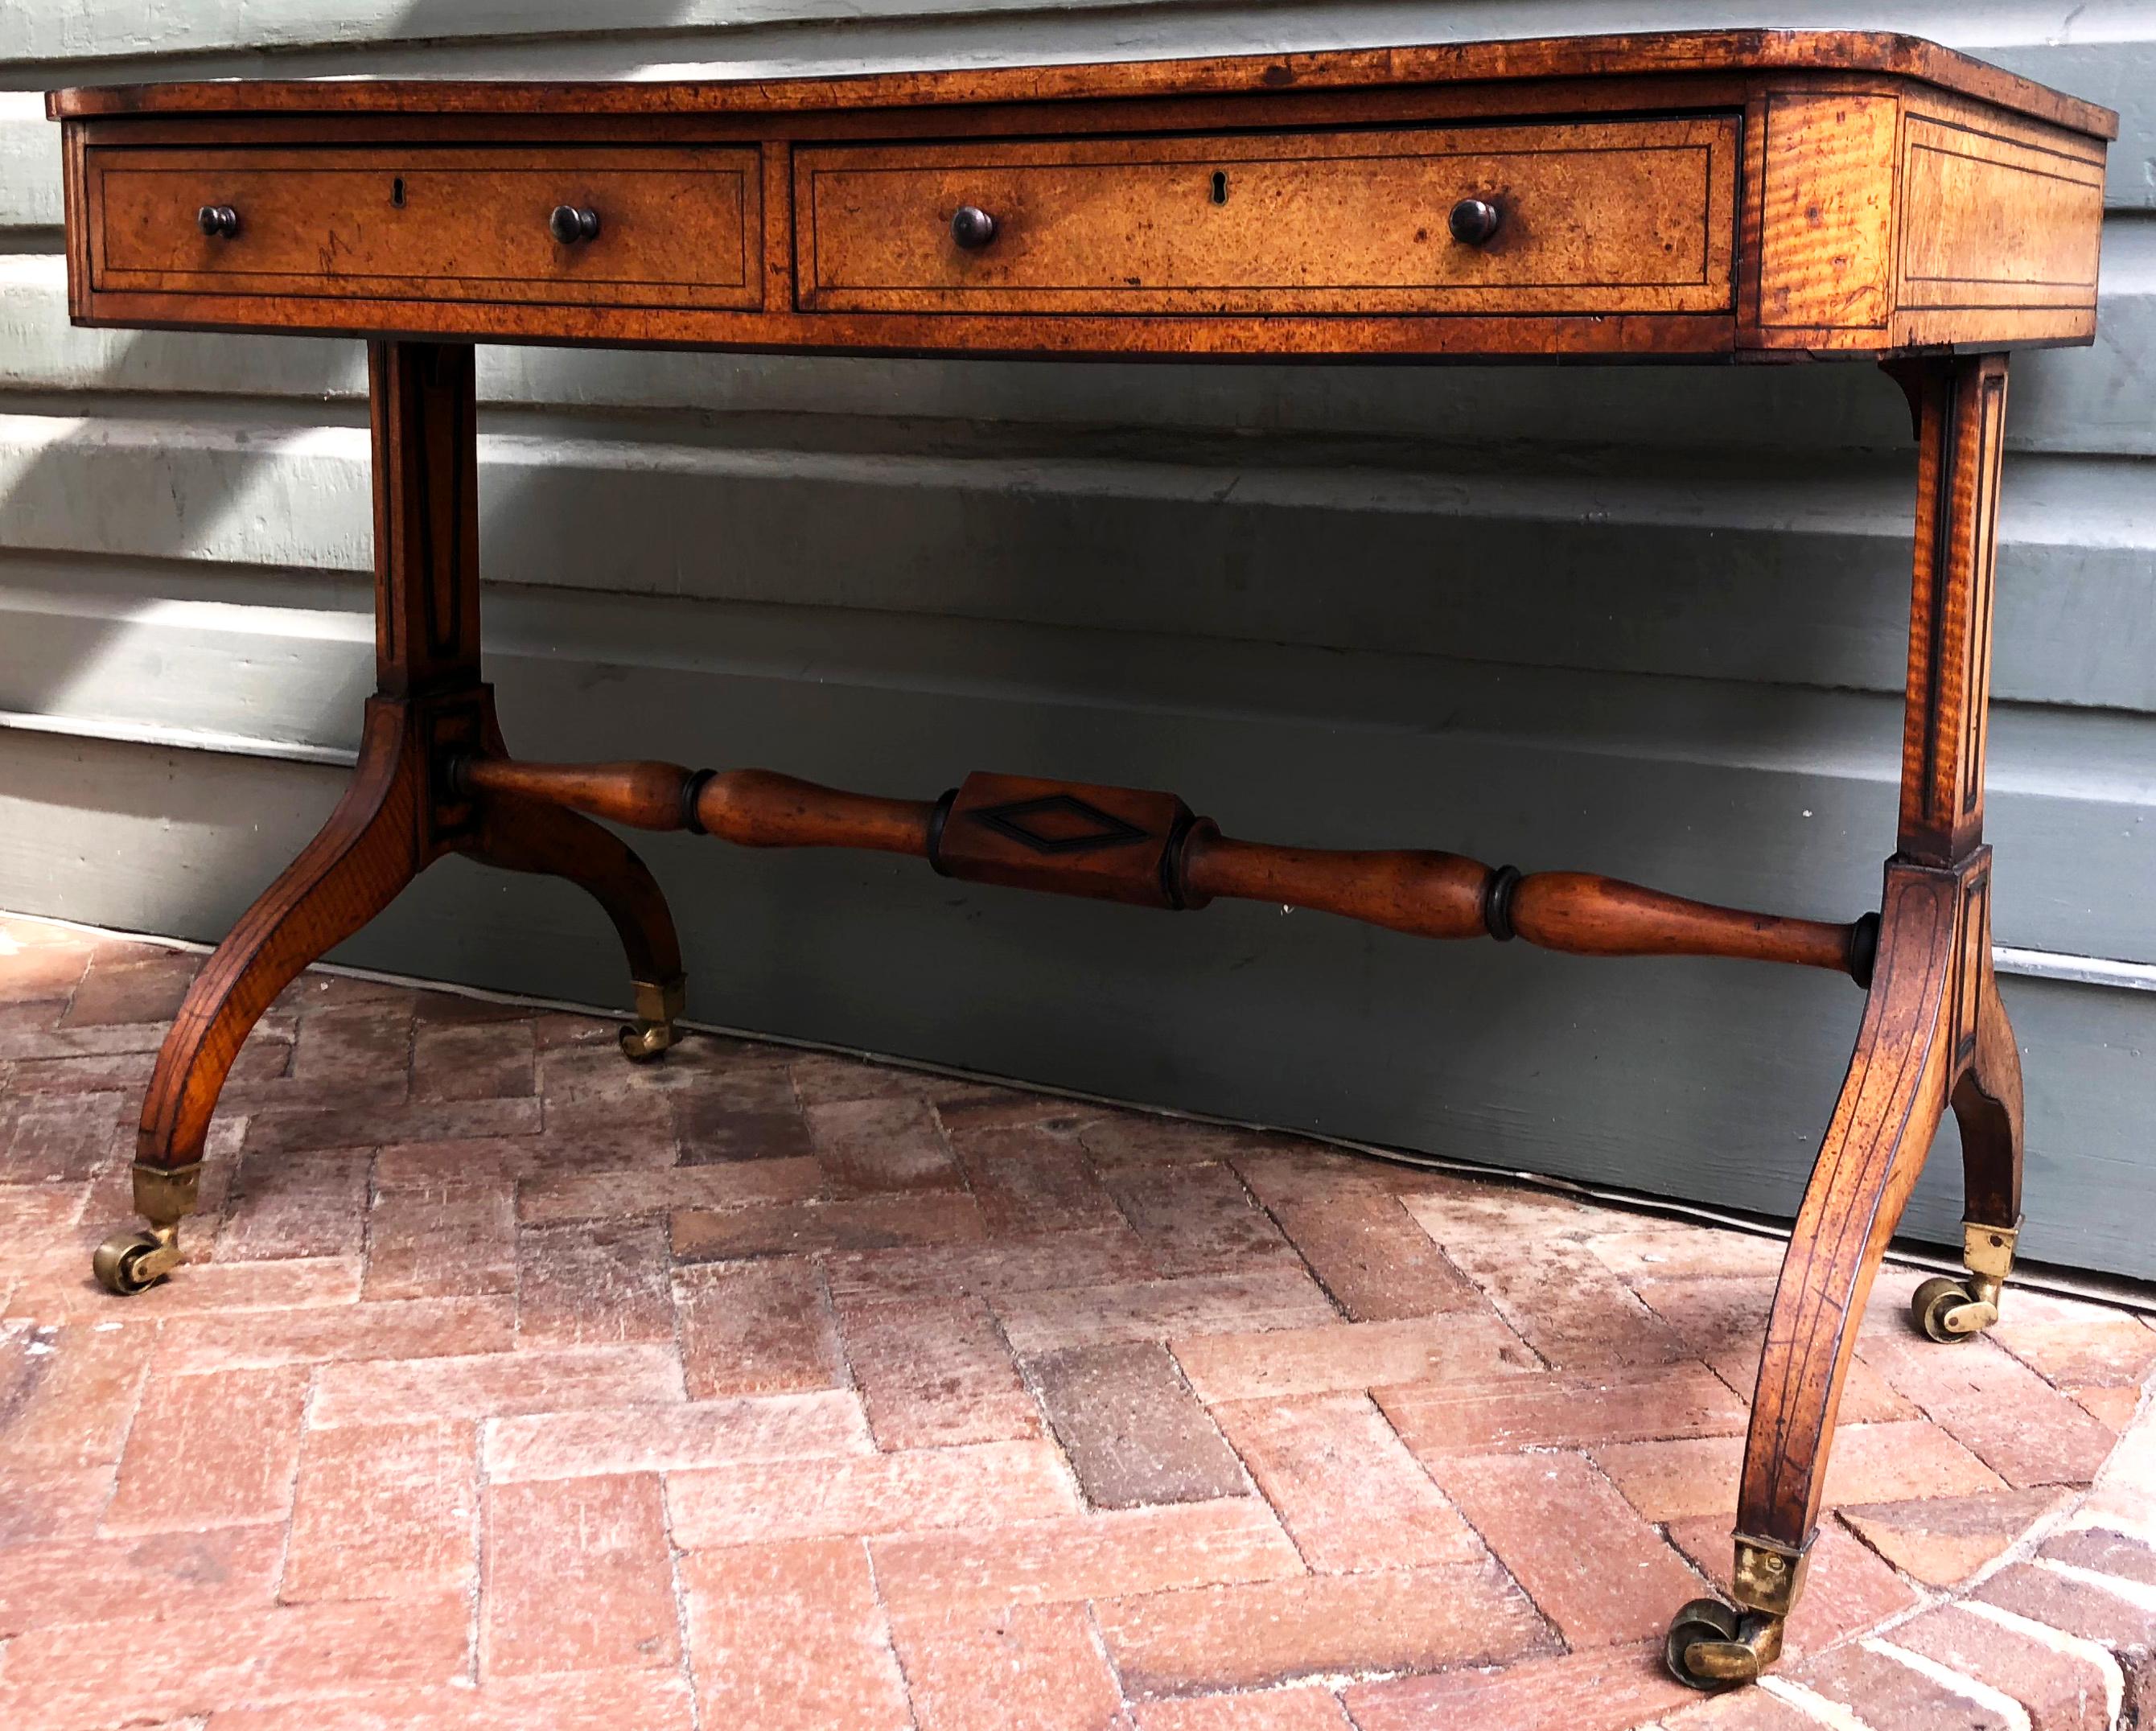 Hand-Crafted Early 19th Century English Regency Sofa or Library Table